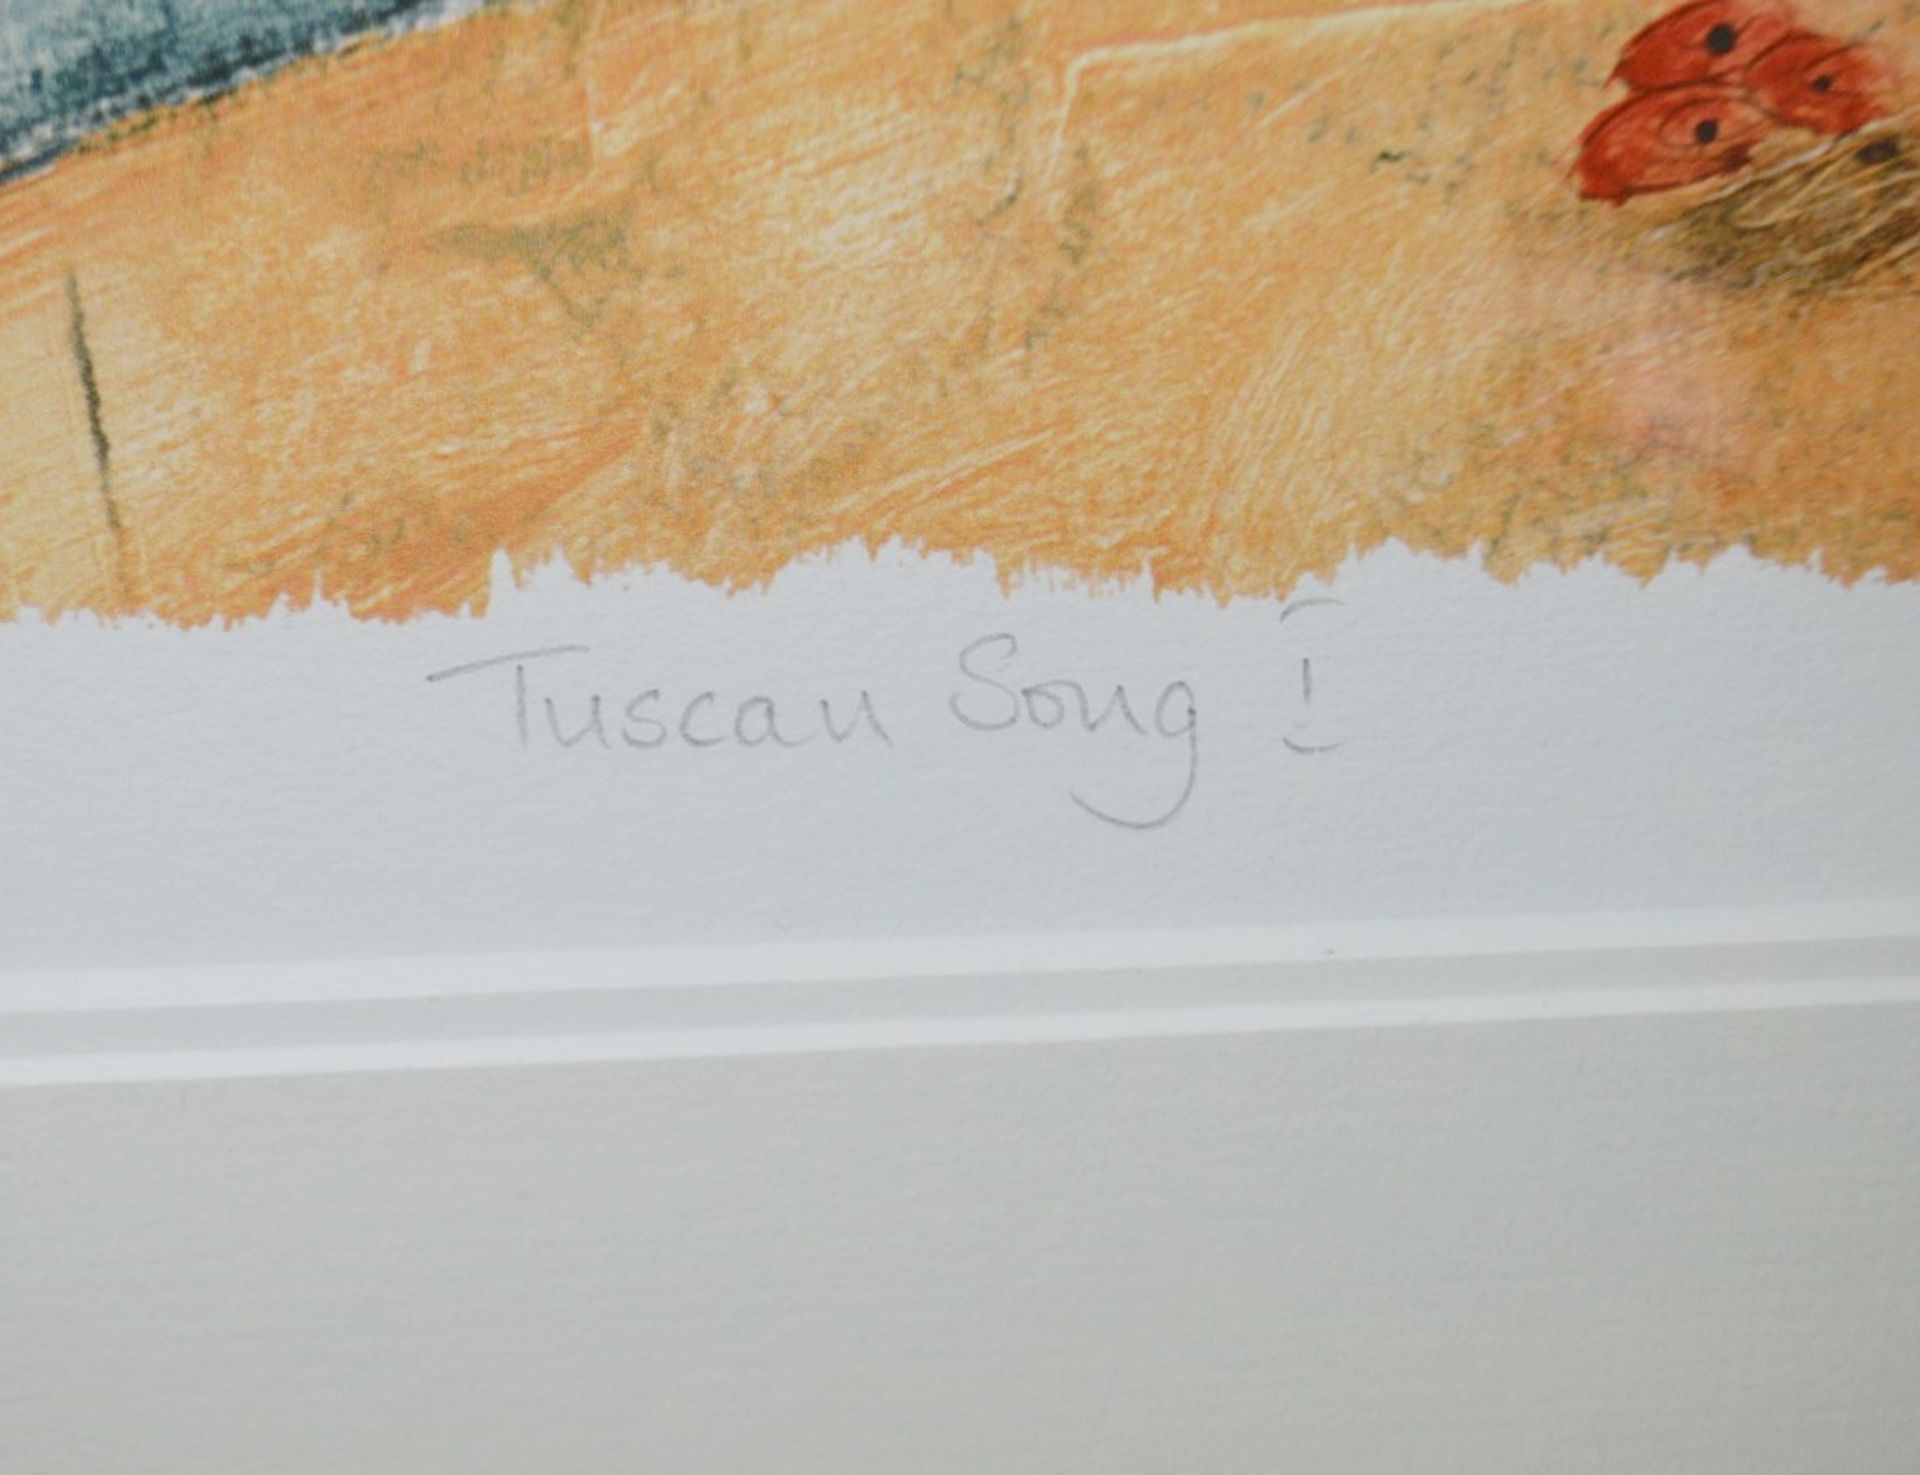 1 x Framed Limited Edition Art Print  'Tuscan Song I' By RICHARD PARGETER - Signed And Mounted - - Image 8 of 10